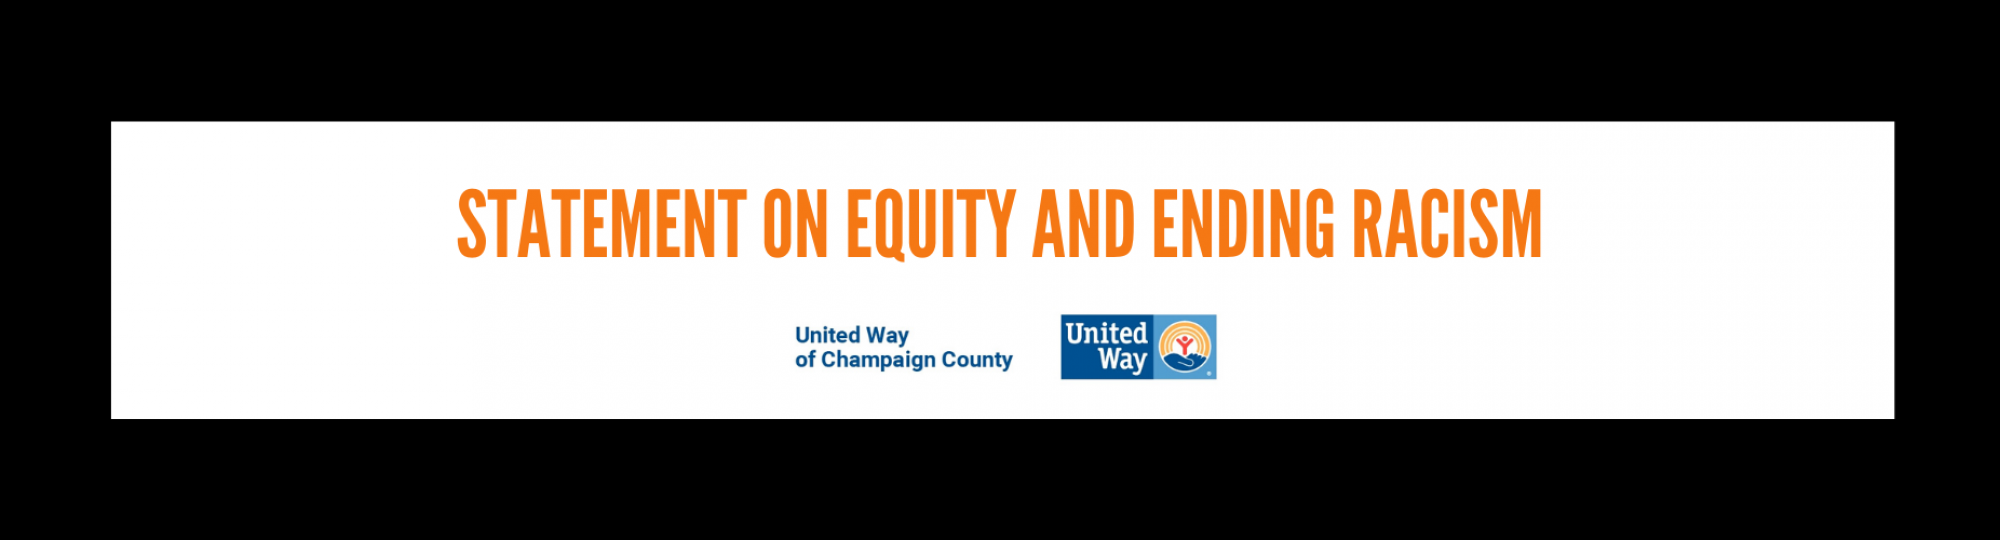 Statement on equity and ending racism